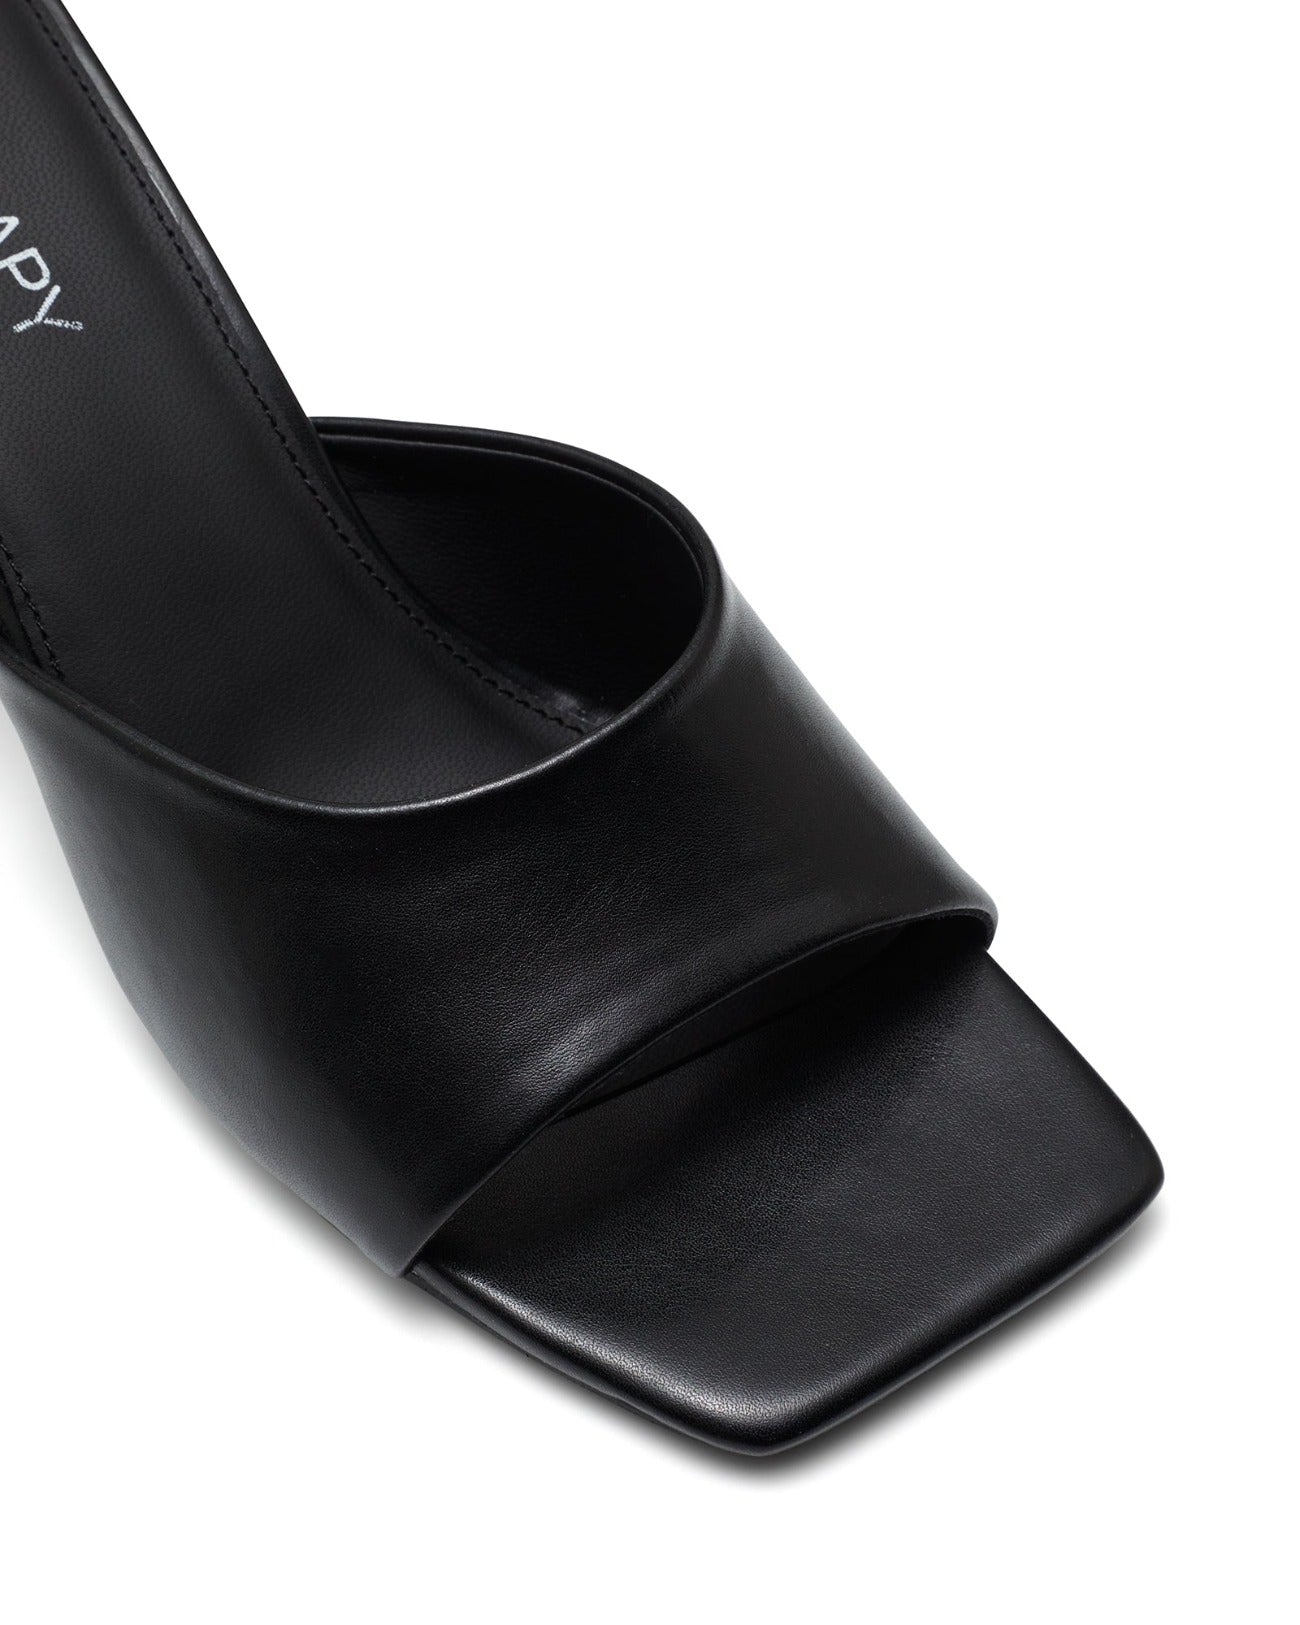 Therapy Shoes Prizm Black | Women's Heels | Sandals | Mule | Square Toe